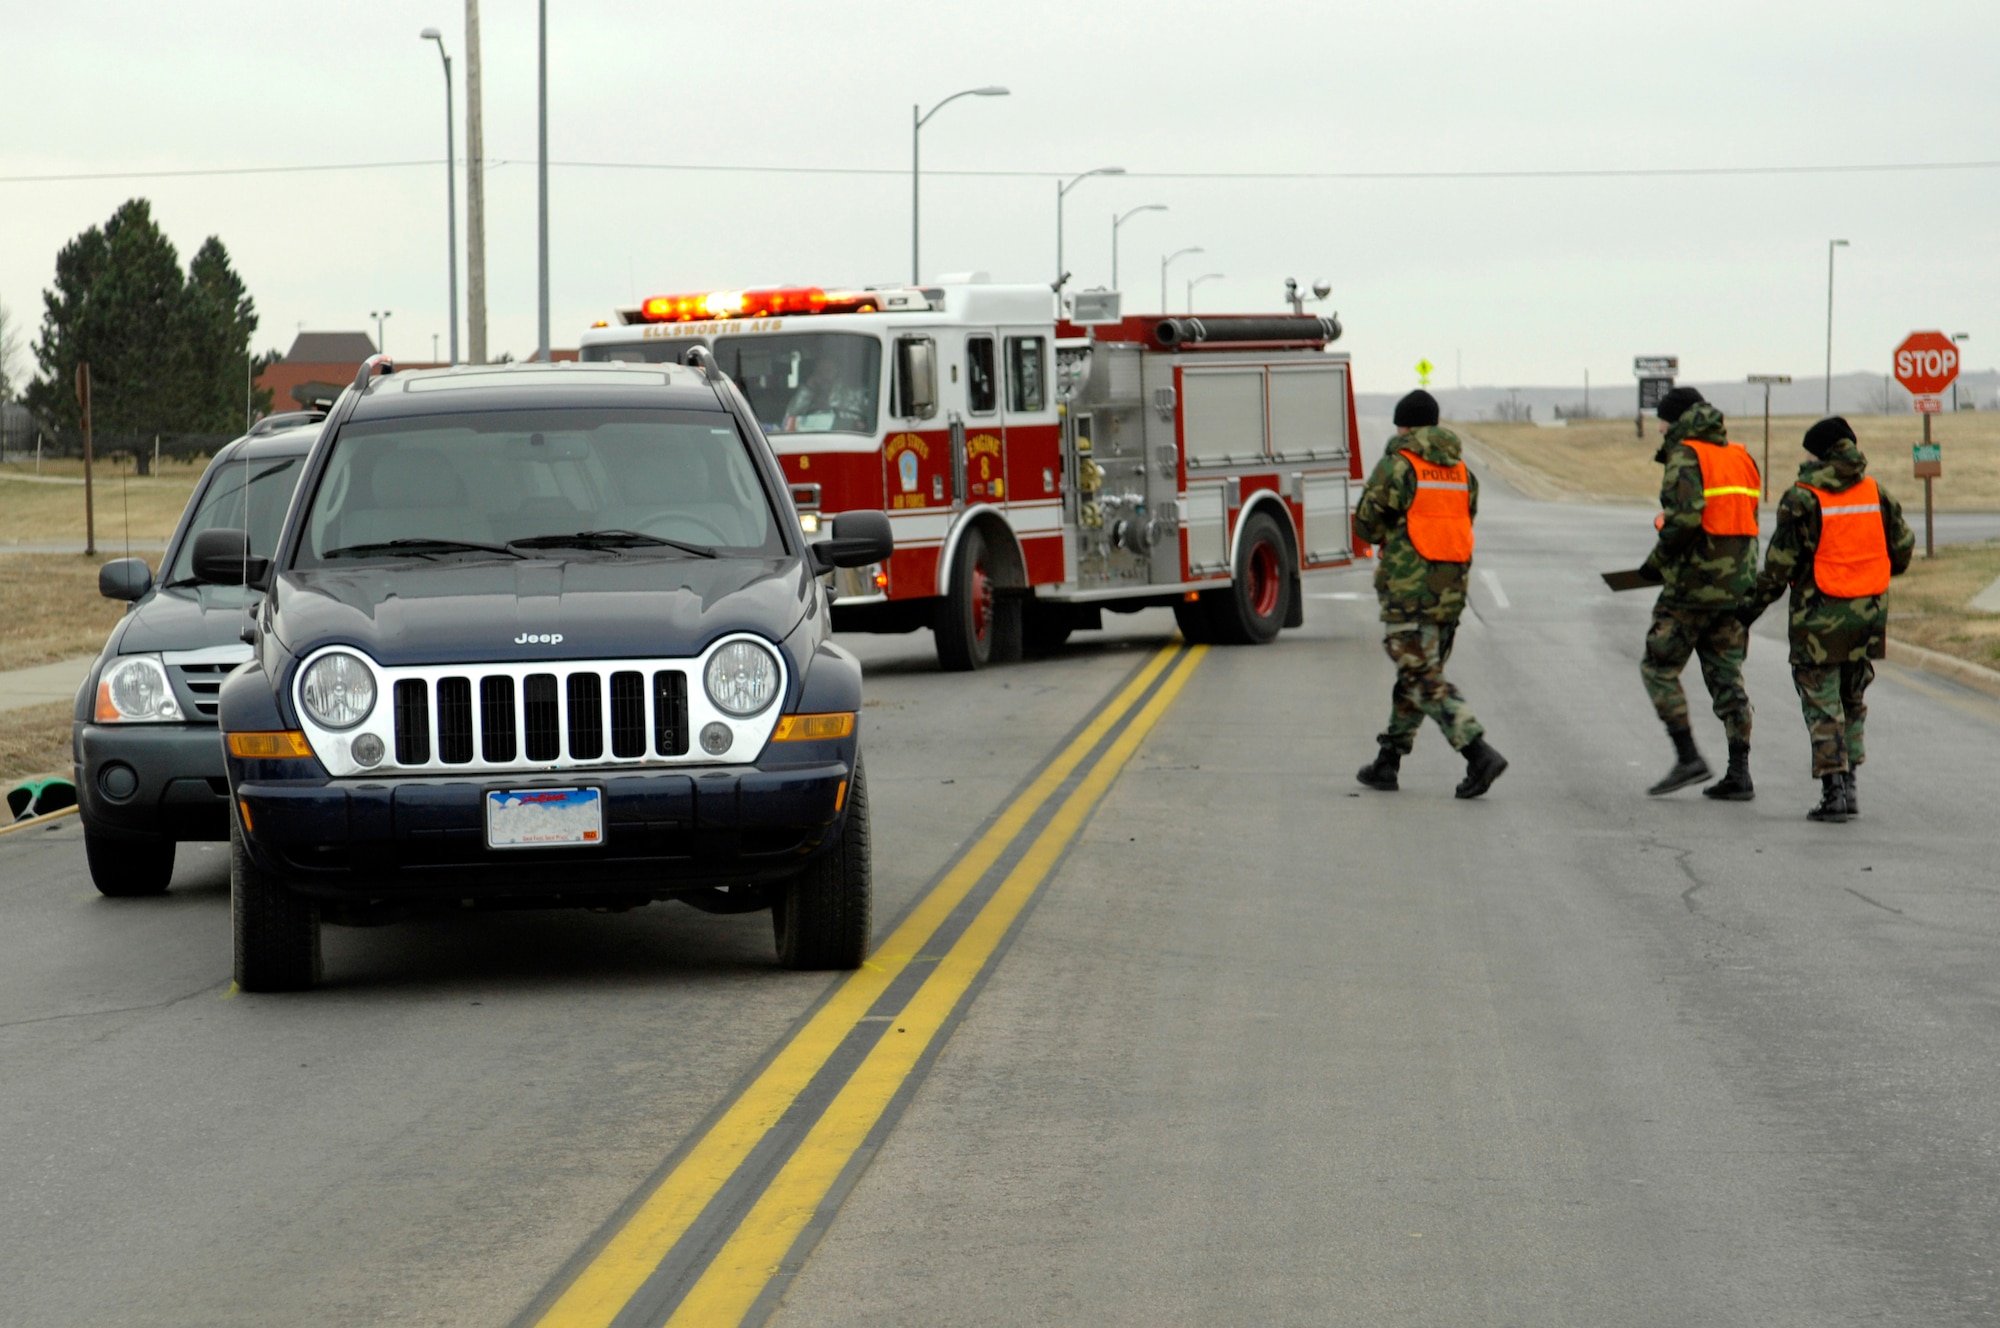 Two civilians and one servicemember were involved in a three car accident north of Lemay and Doolittle Blvd. at 7 a.m. Nov. 27. One civilian was transported to Rapid City Regional Hospital and was treated and released. Servicemembers are reminded to observe all safety requirements while traveling on Ellsworth.(U.S. Air Force photo by Senior Airman Angela Ruiz)